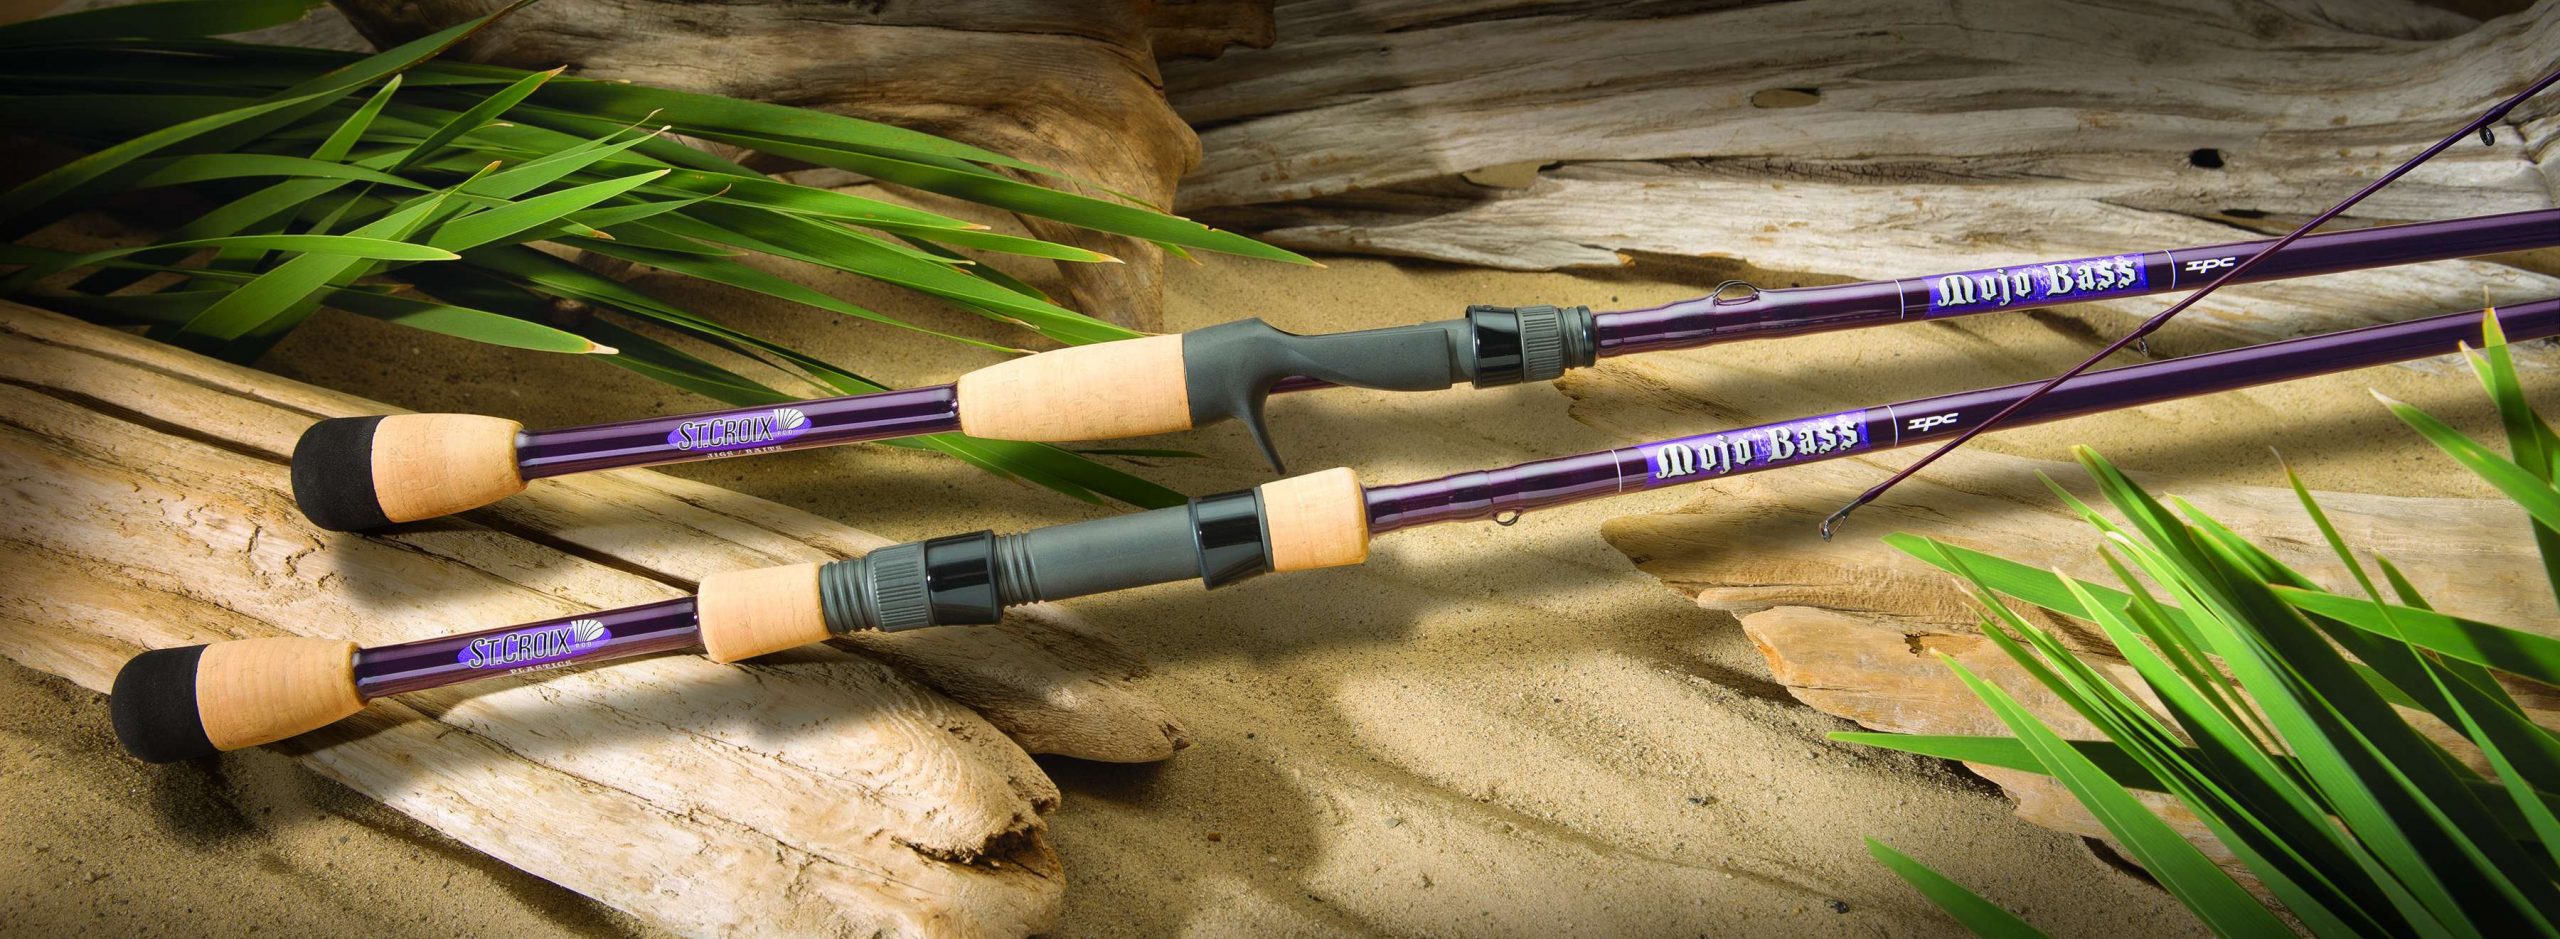 <b>St. Croix</b><br>	Mojo Bass  <br>			St. Croix is updating their Mojo Bass line of rods with a 15 percent reduction in weight and improved balance due to their new high-modulus SC graphite material. St. Croix says anglers will enjoy increased strength and sensitivity. The affordable series of rods comes with a 5-year warranty. 